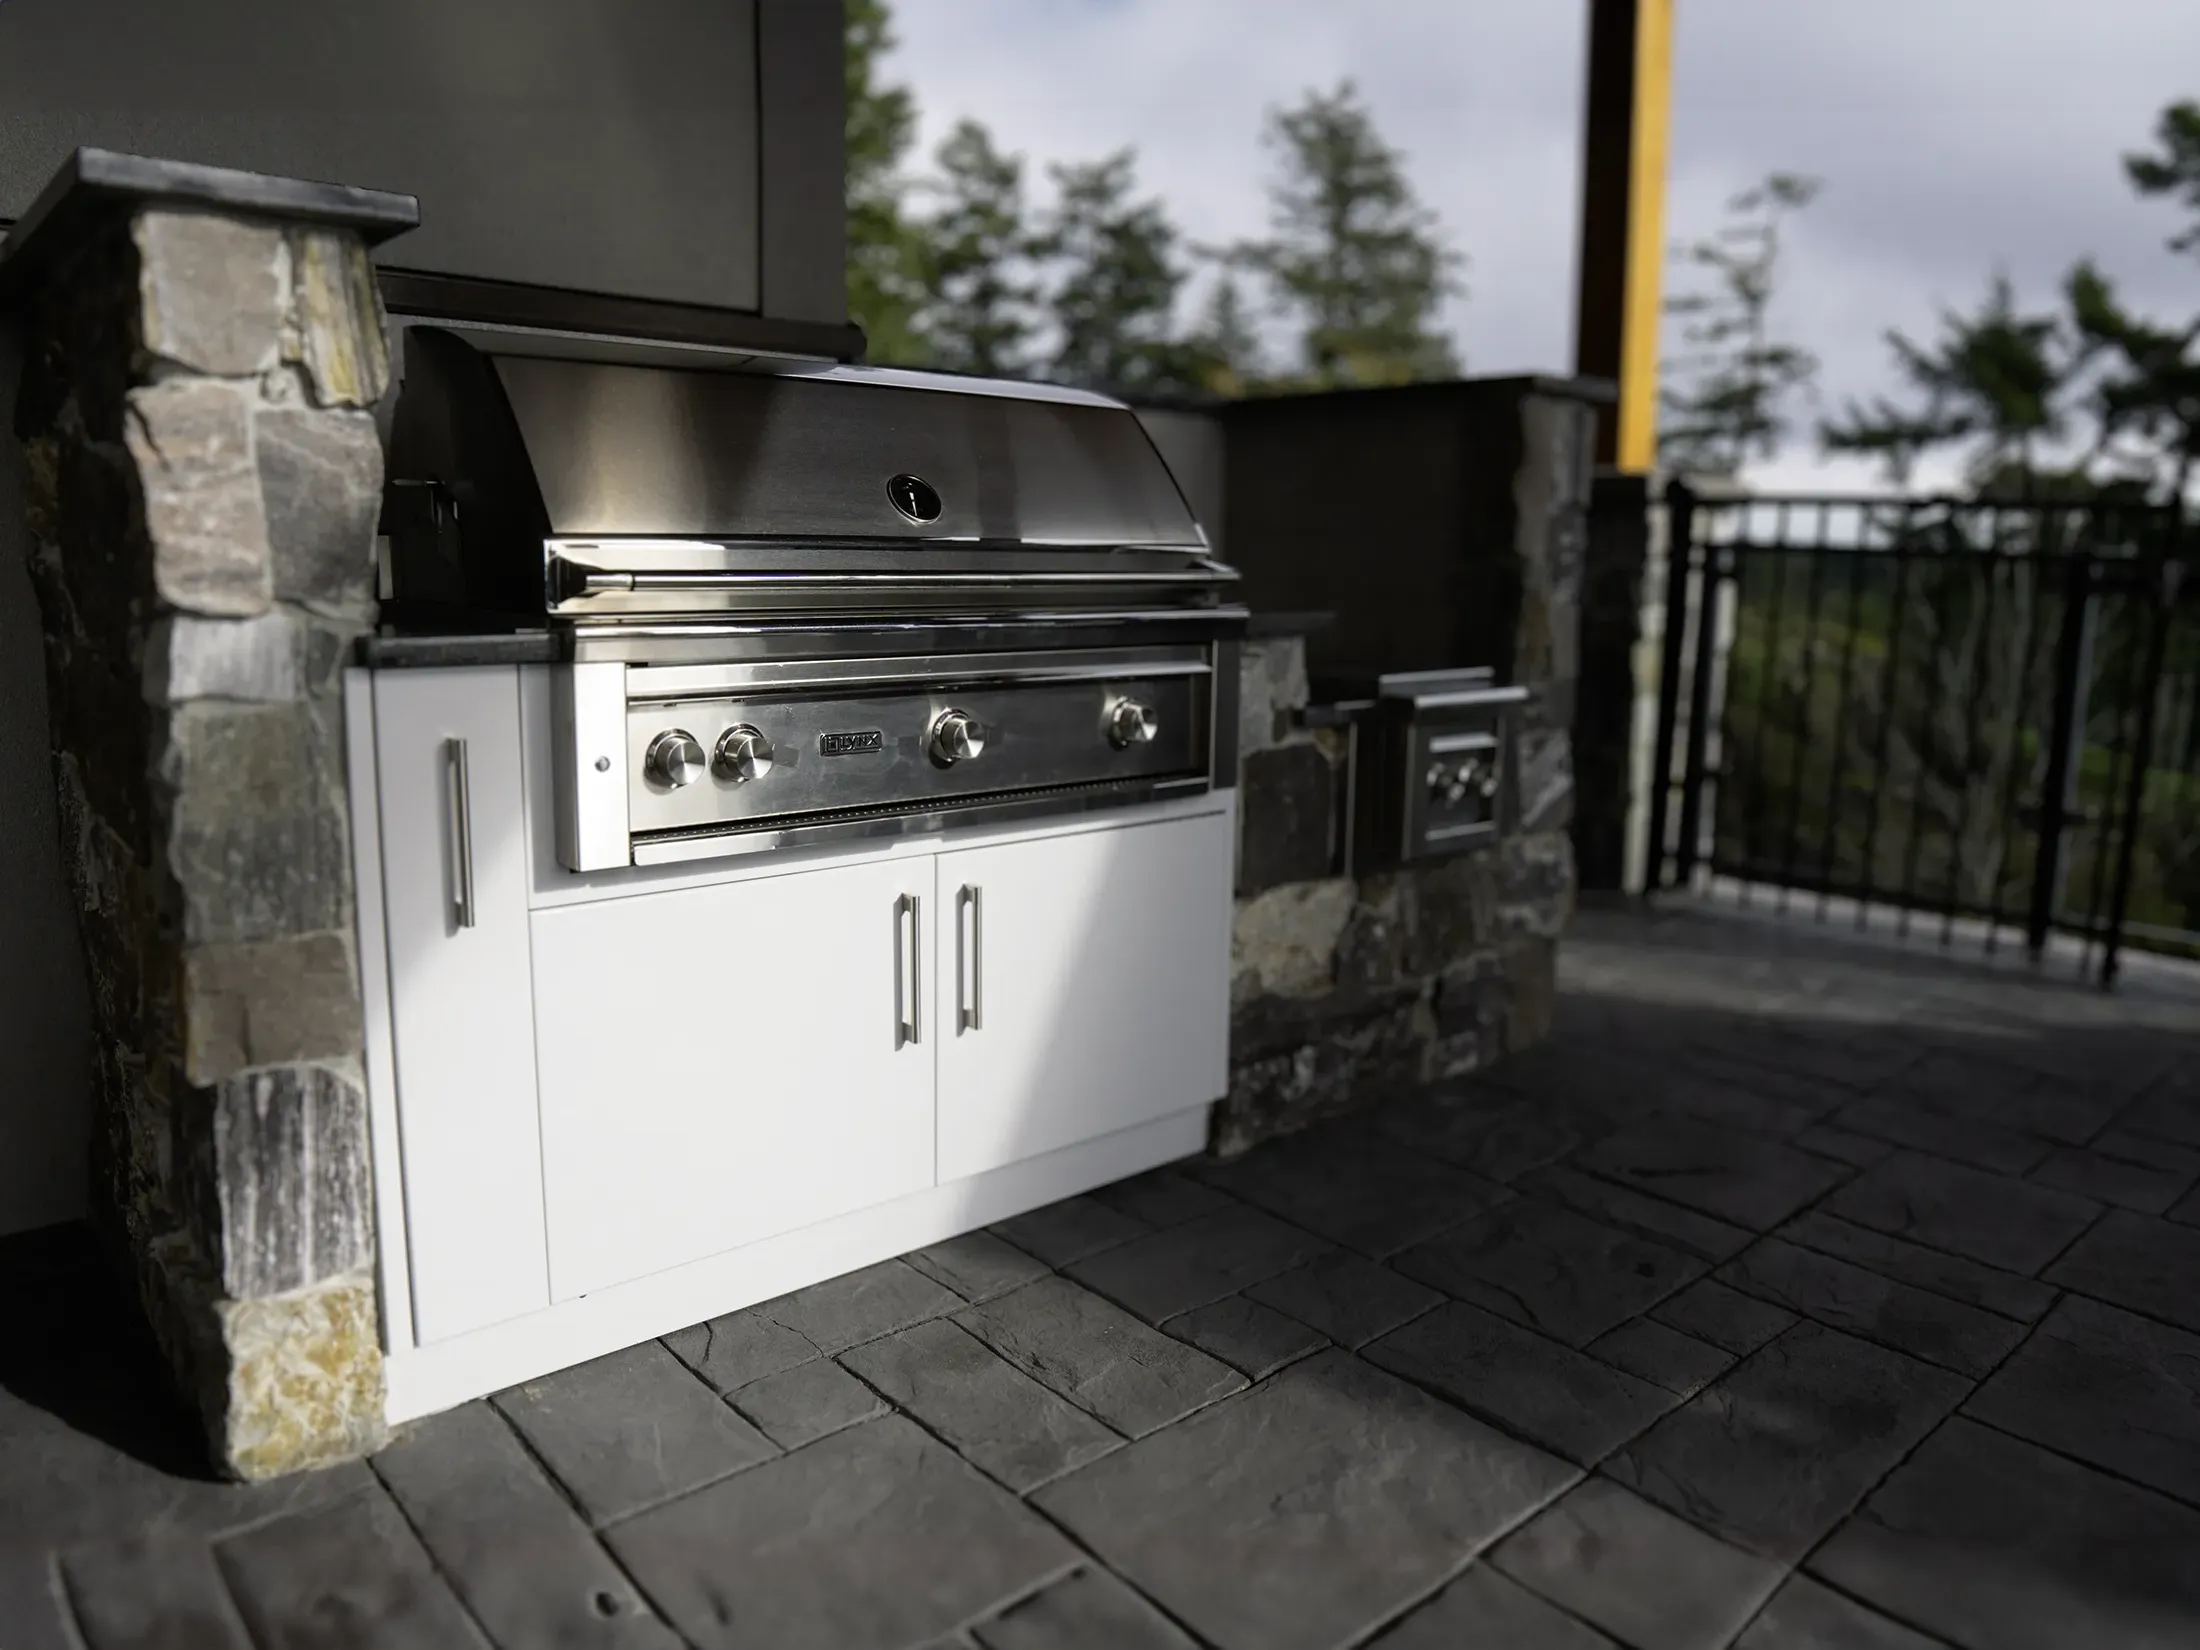 Outdoor kitchen made by Silver Fern Stainless in Victoria BC